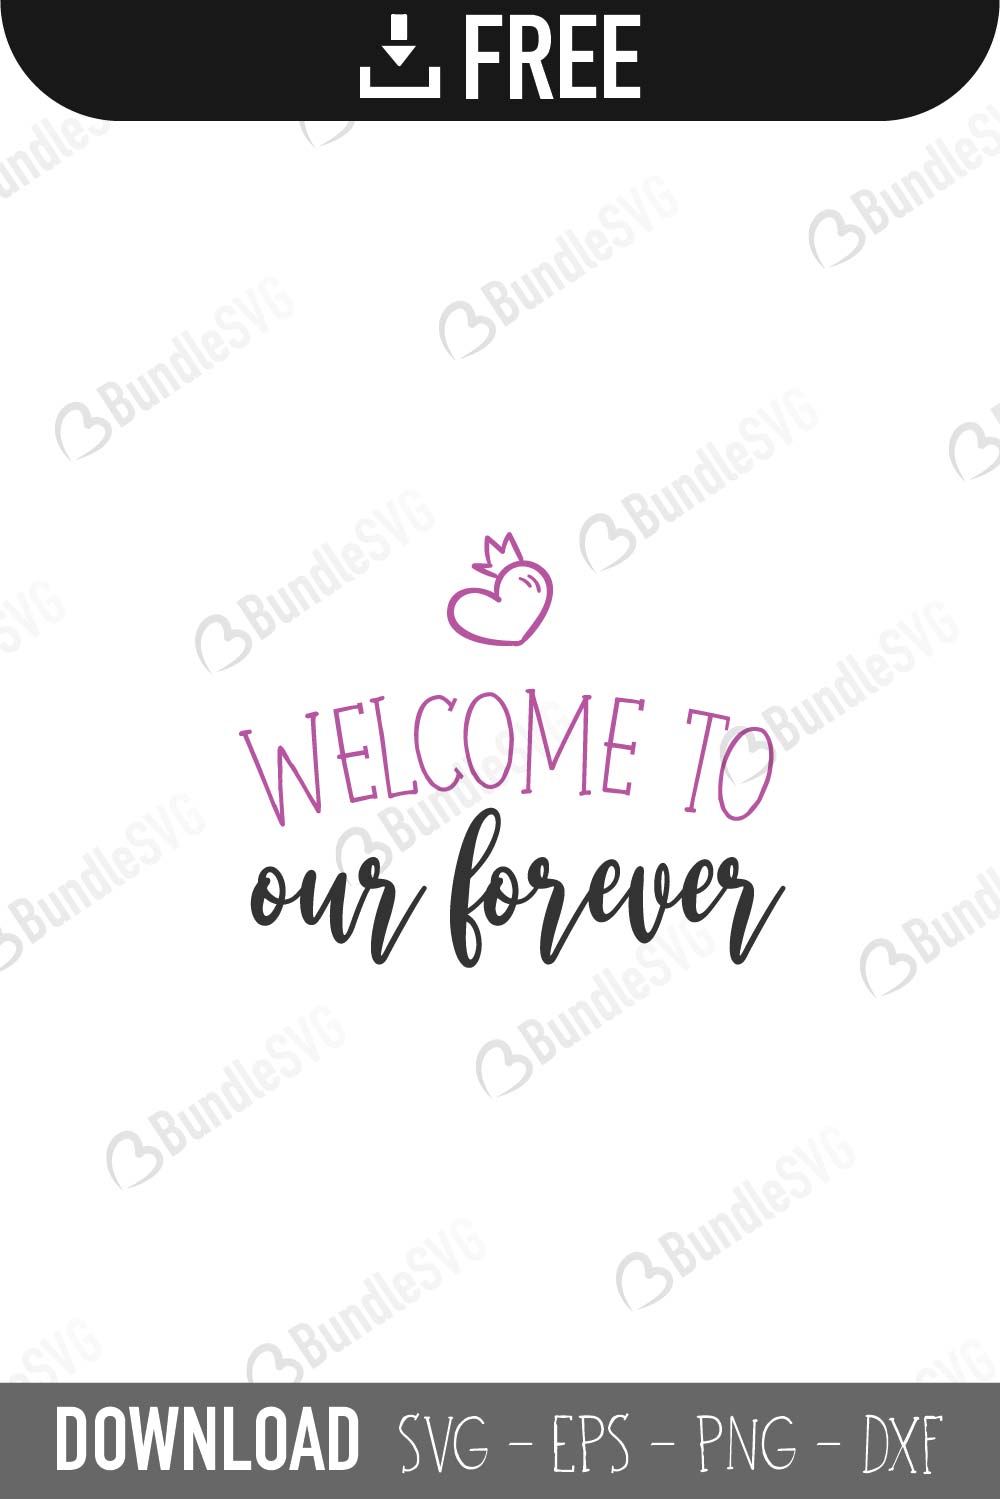 Cutting File Svg Dxf Eps Png Commercial Use Cut File Instant Download Wedding Svg Welcome To Our Forever Svg Clip Art Art Collectibles Delage Com Br